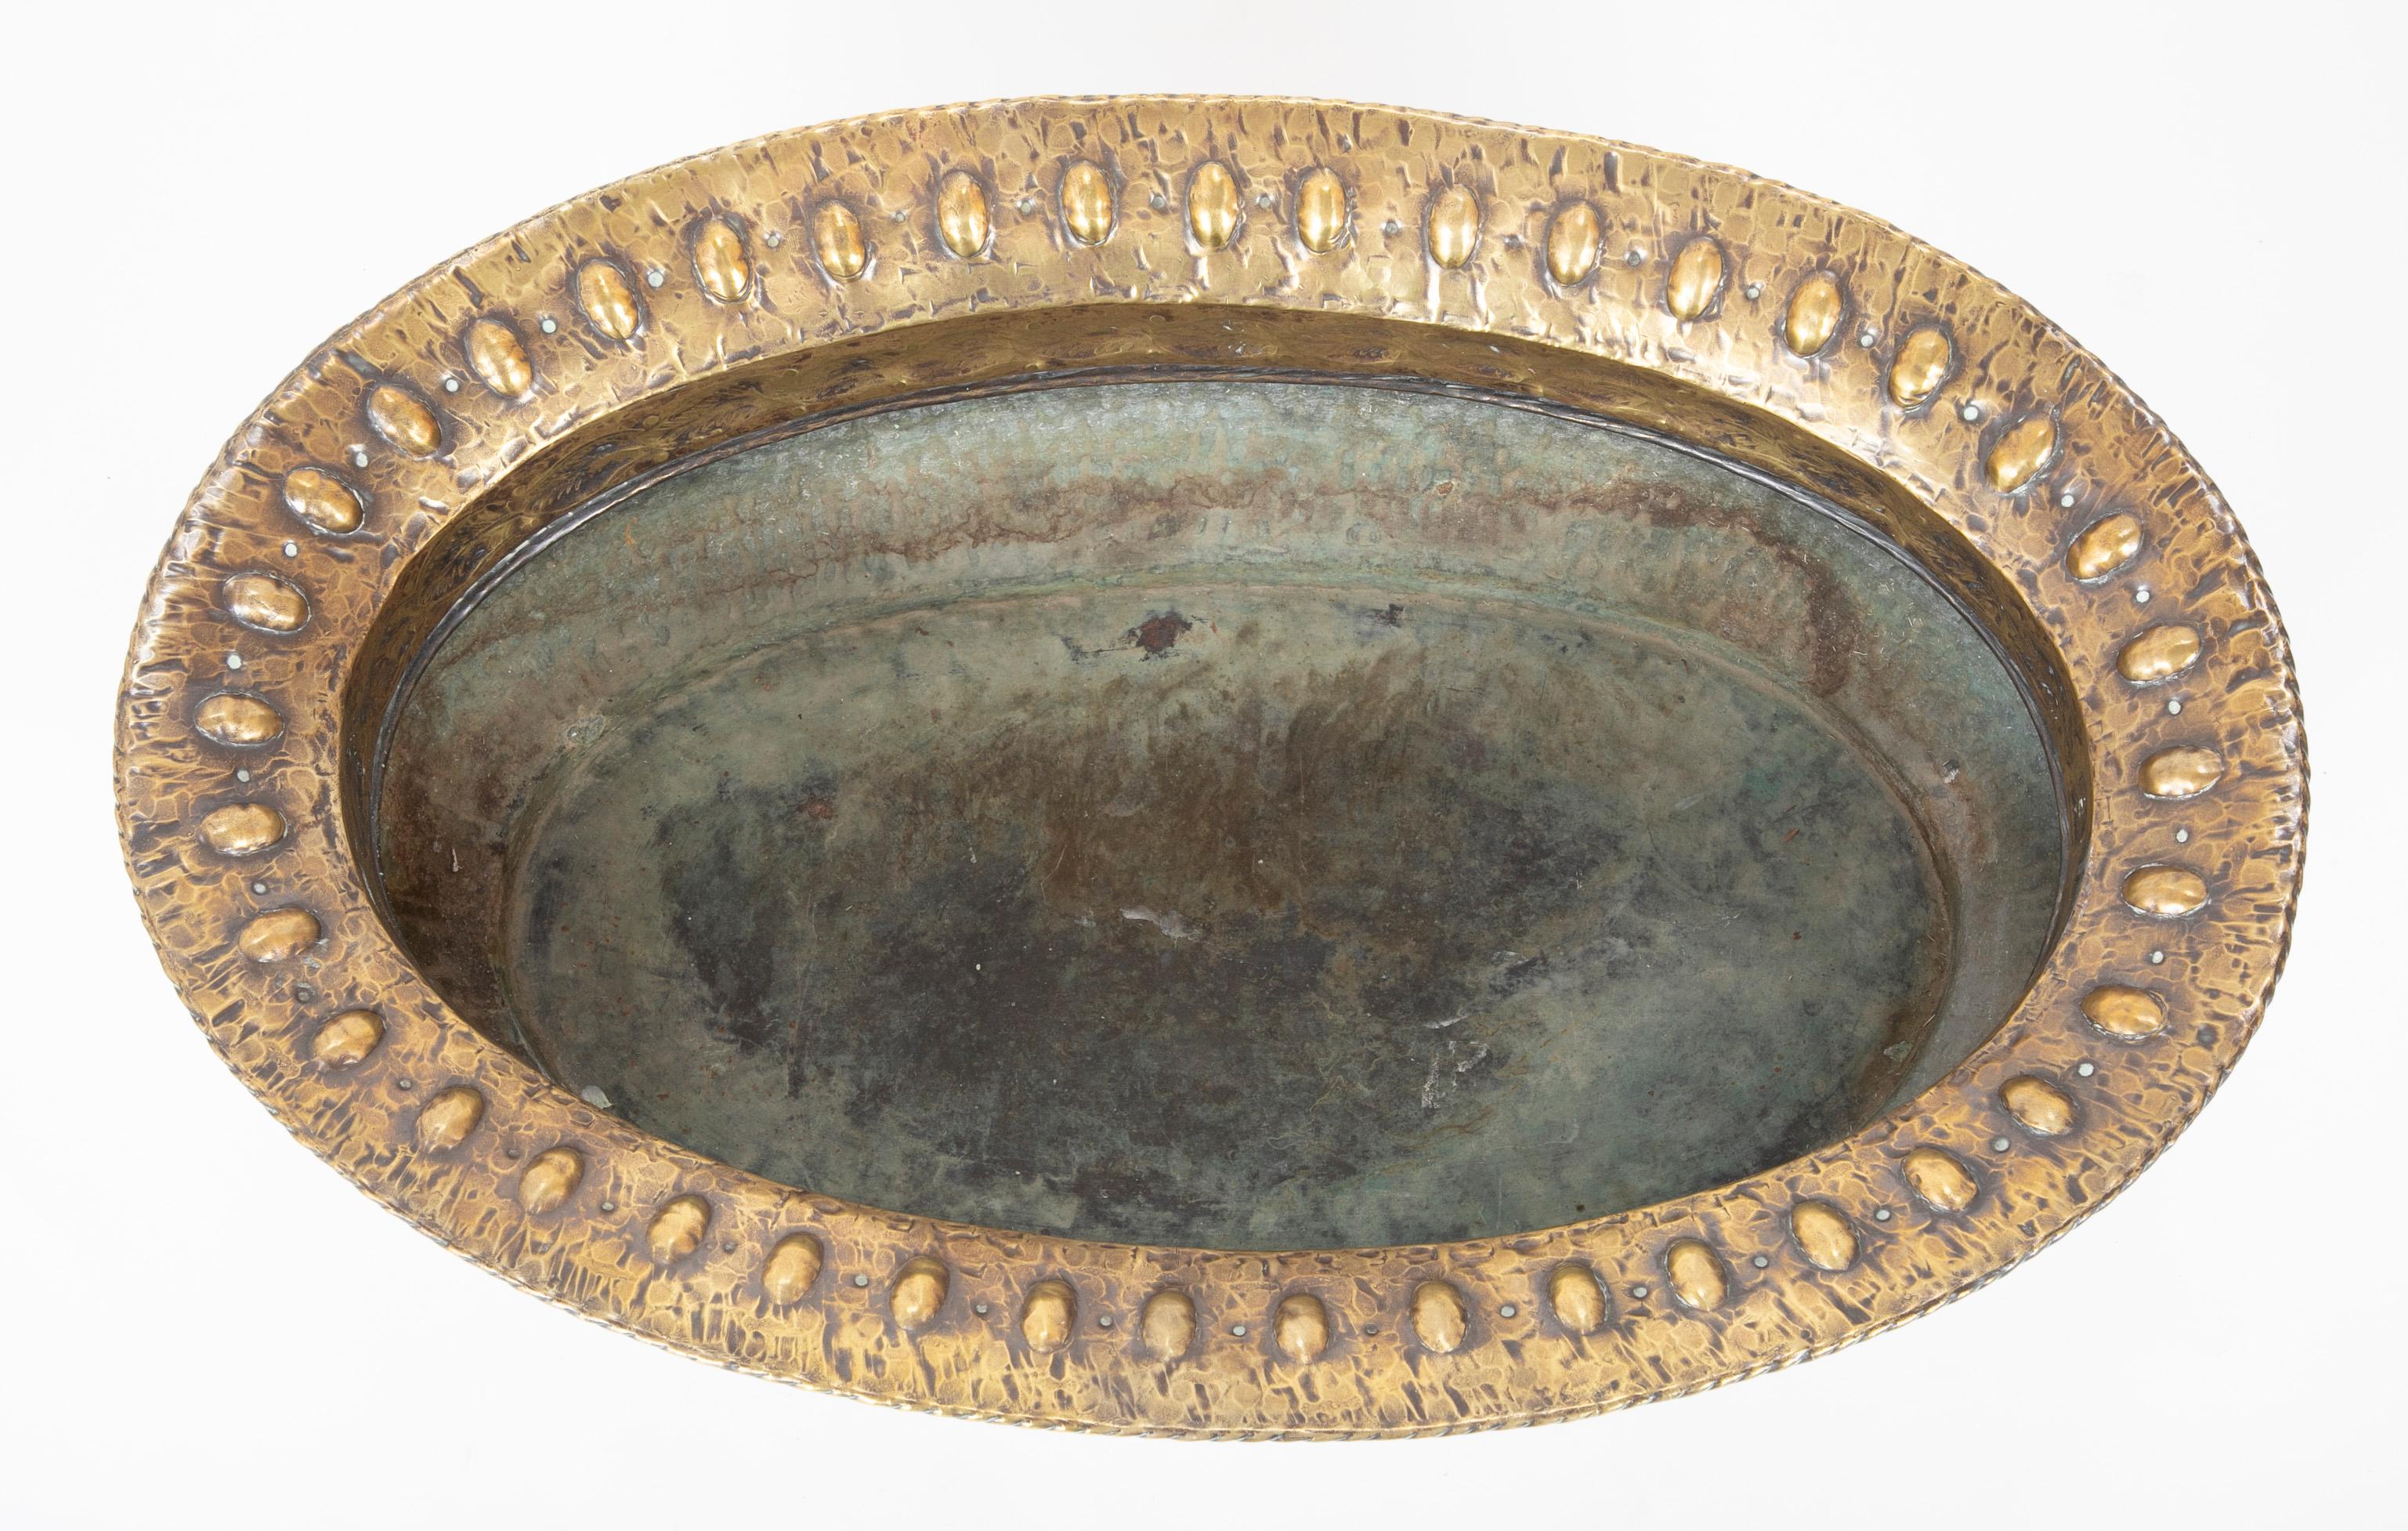 Impressive brass repousse Italian centerpiece with hand-hammered surface. The rim decorated with raised oval cabochons, the band underneath with etched interlocking leaves, the body with a stippled rusticated surface. Supported on four lion paw